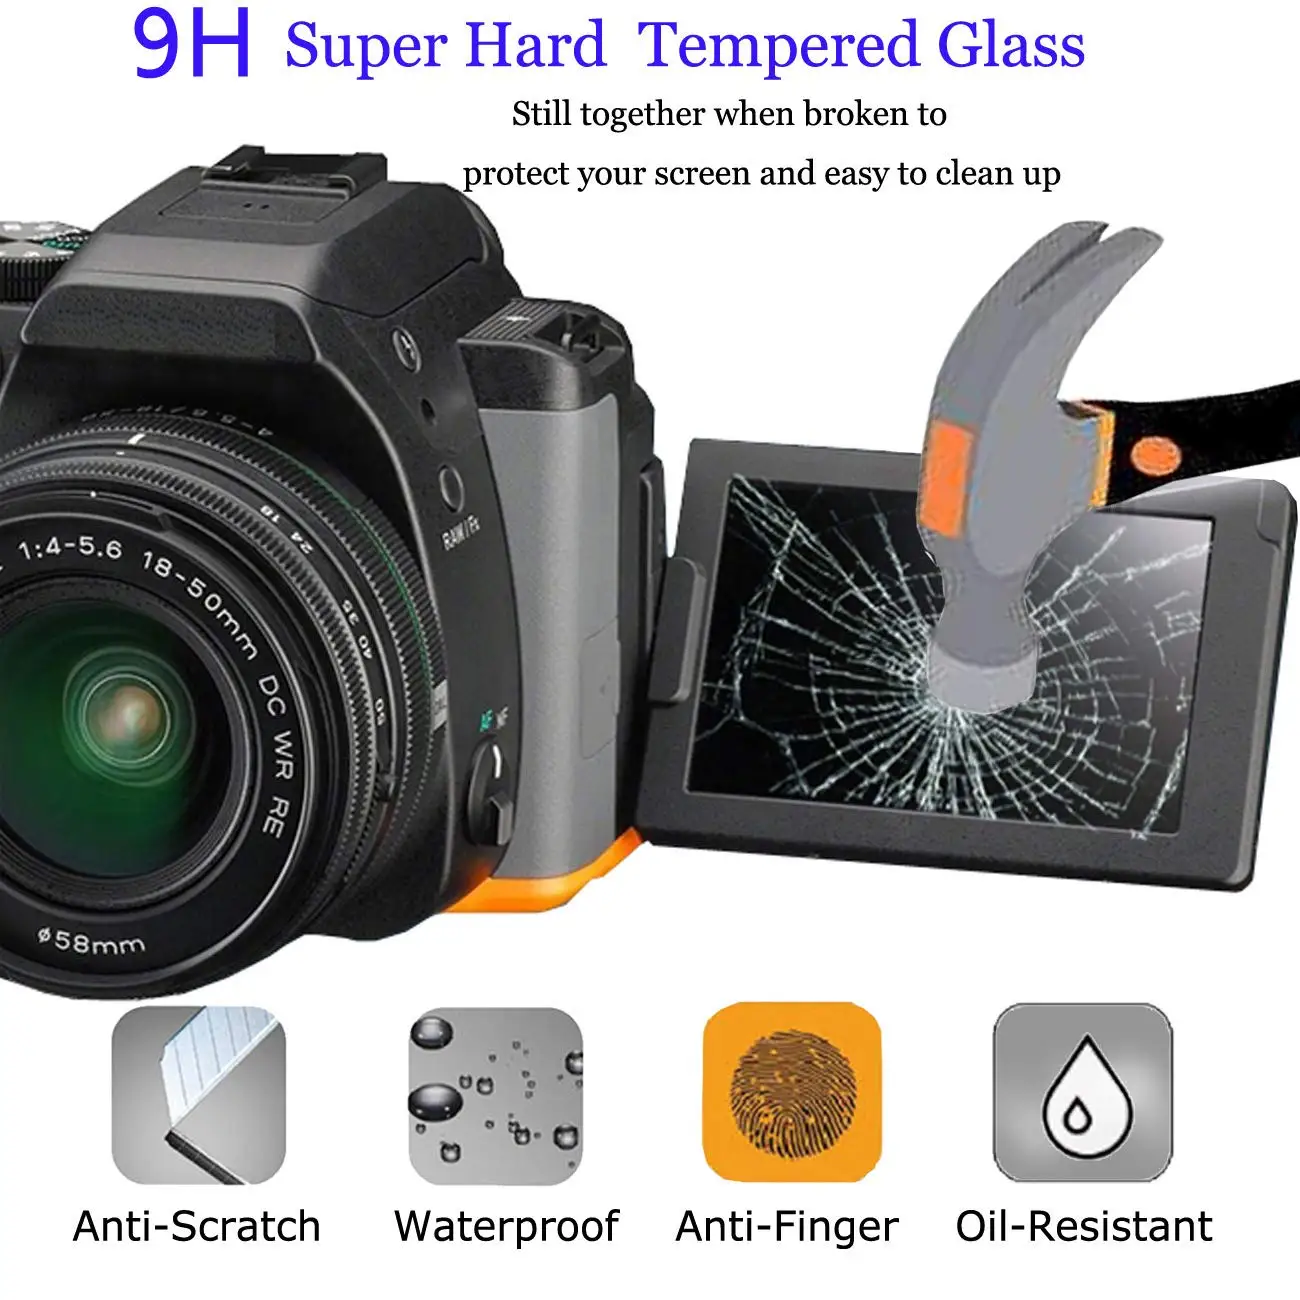 9h tempered glass lcd screen protector for canon eos r6 r5 r rp 90d m200 850d m6 mark ii 5d mark ii 2 1ds mark iii 3 t8i free global shipping